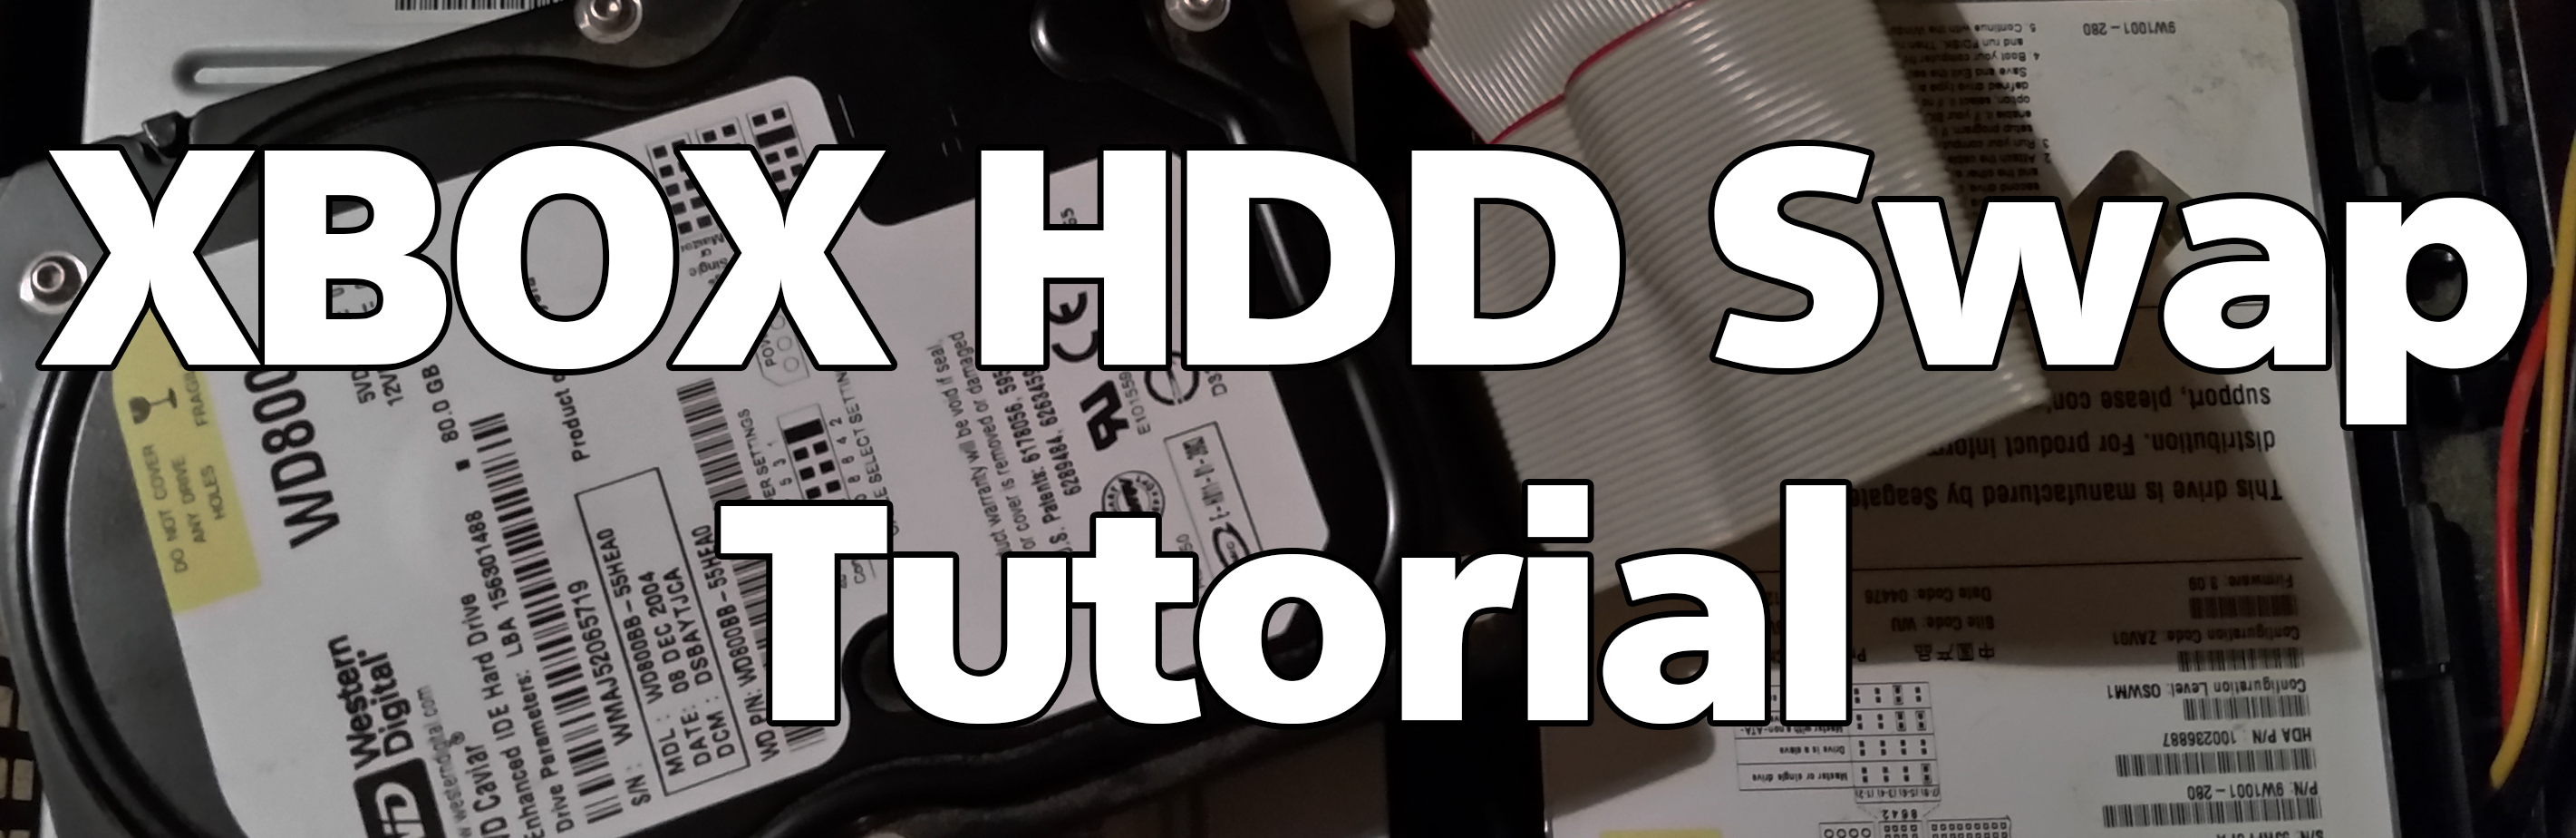 Xbox HDD Tutorial Title